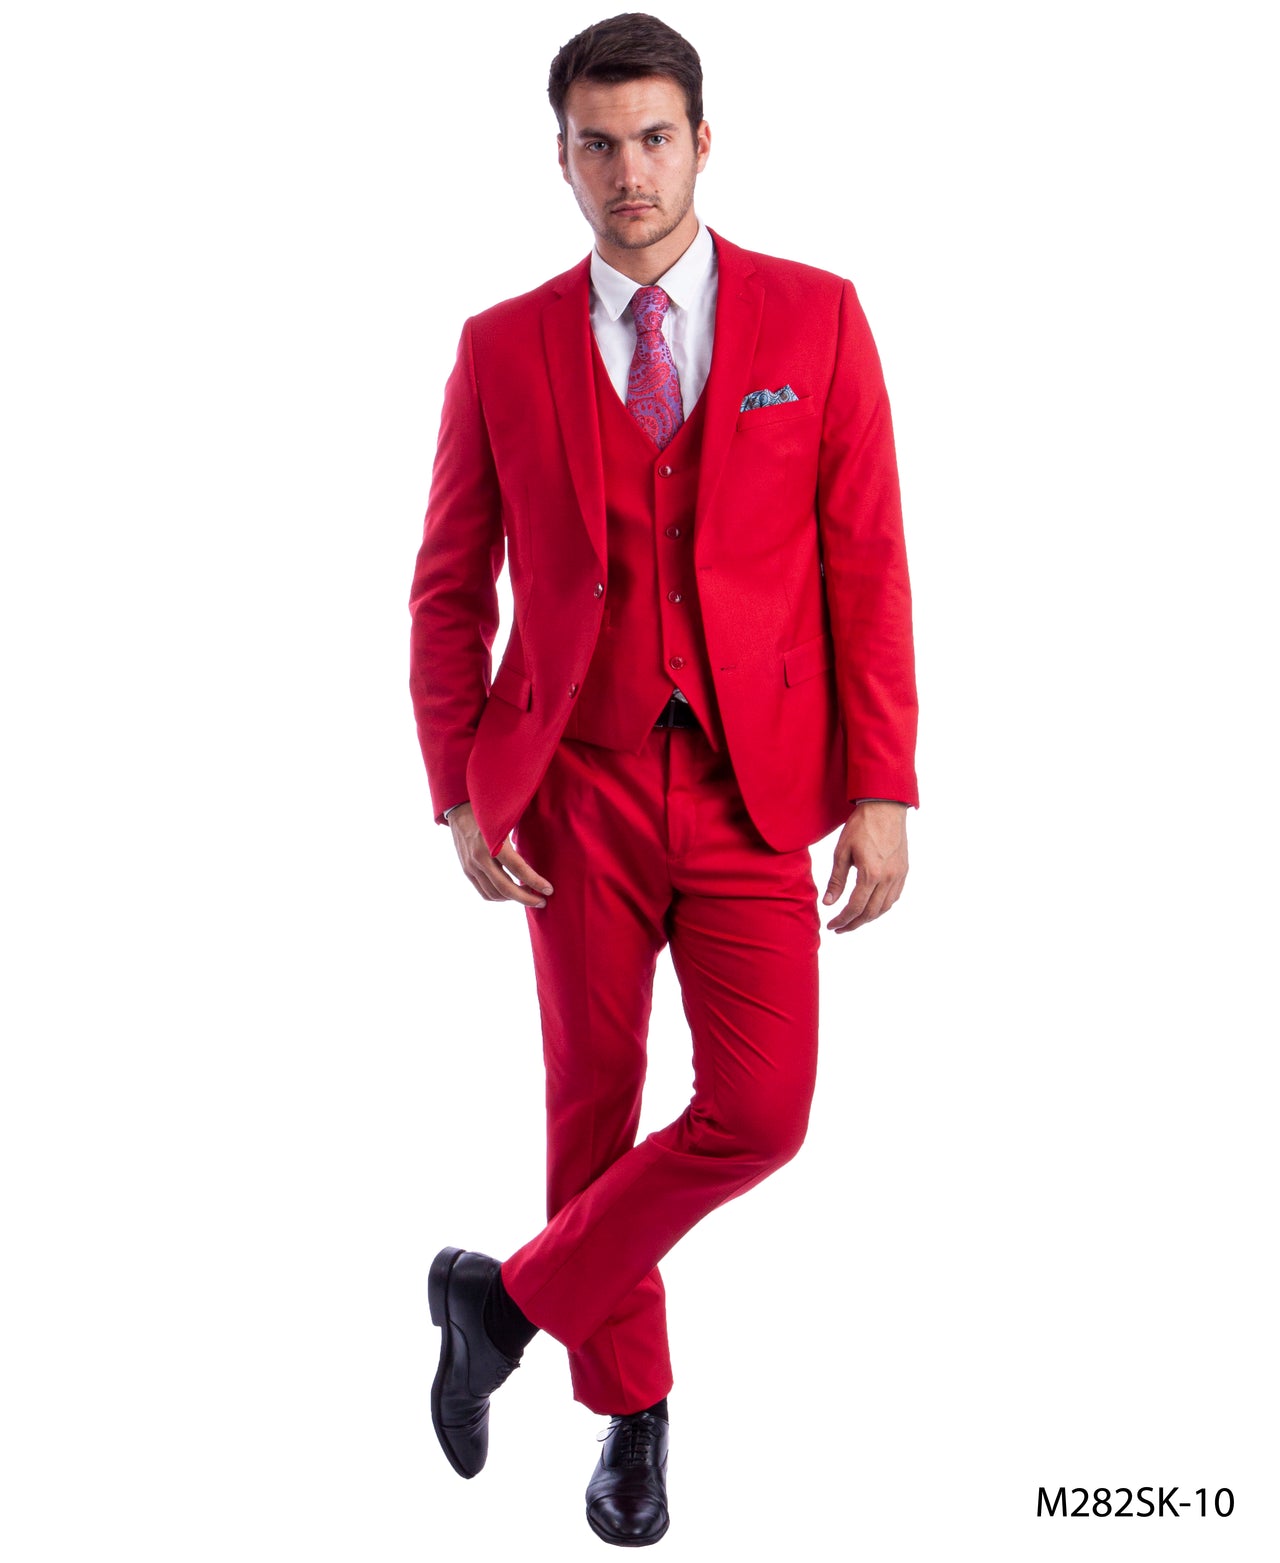 Red Suit For Men Formal Suits For All Ocassions - Hattitude